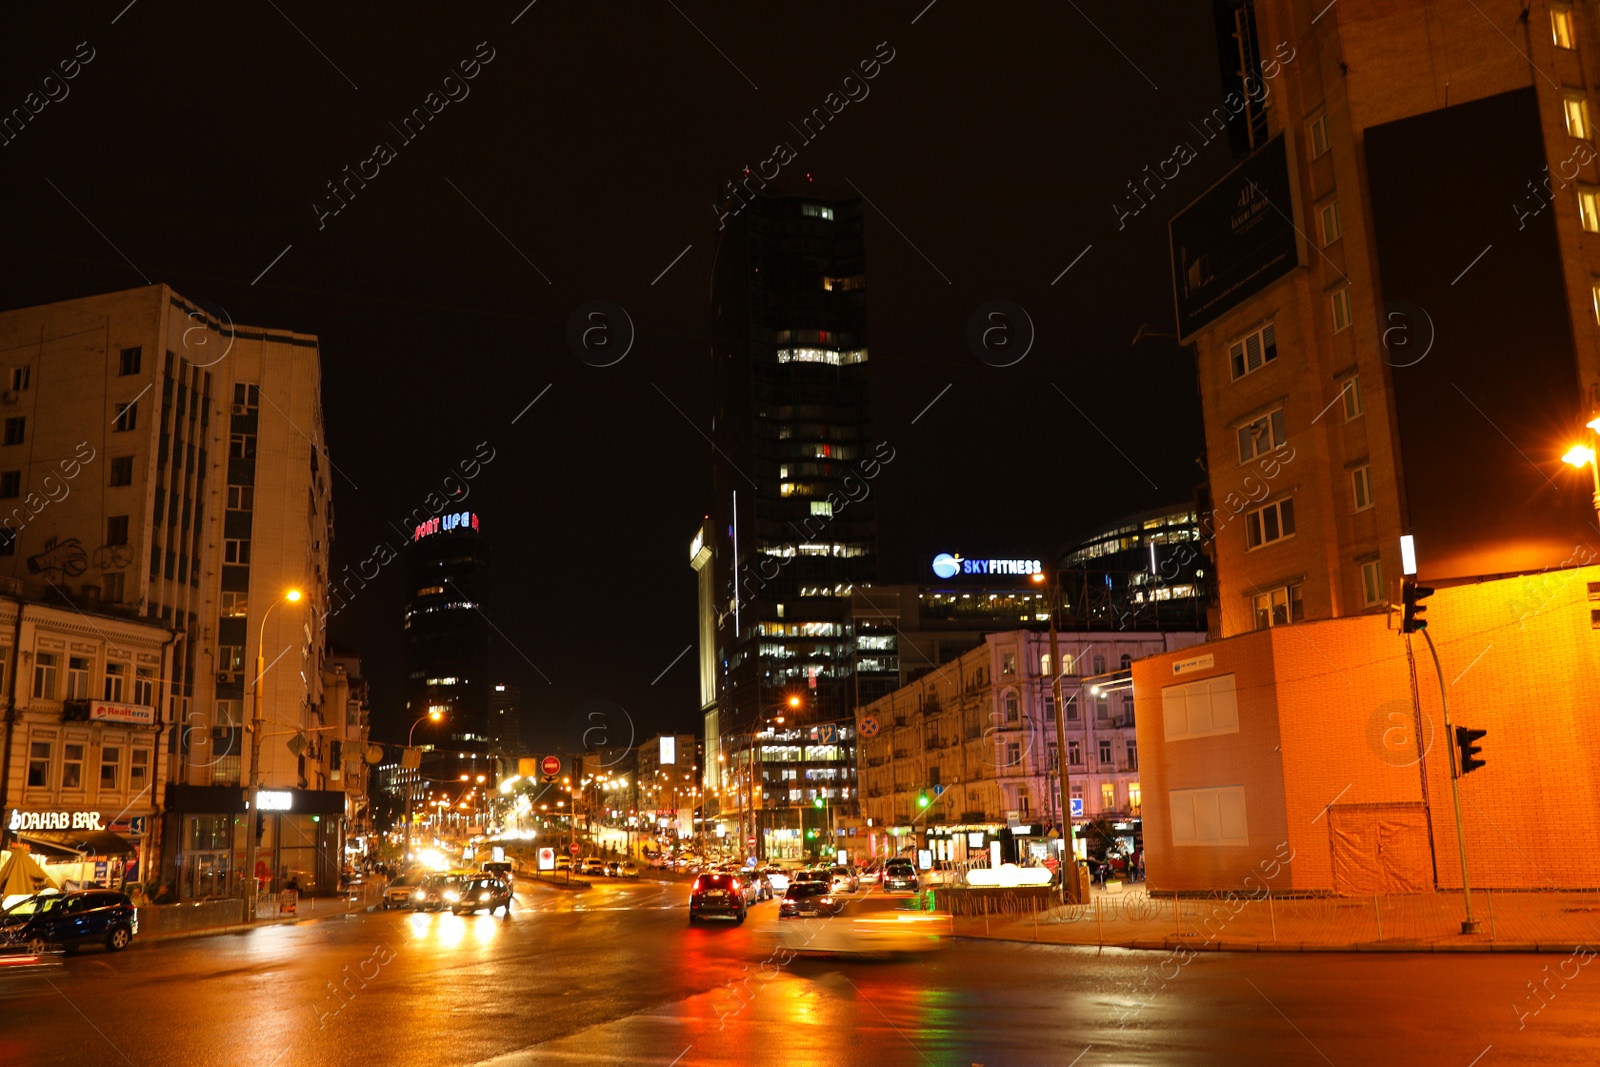 Photo of KYIV, UKRAINE - MAY 22, 2019: View of night city with illuminated buildings and road traffic